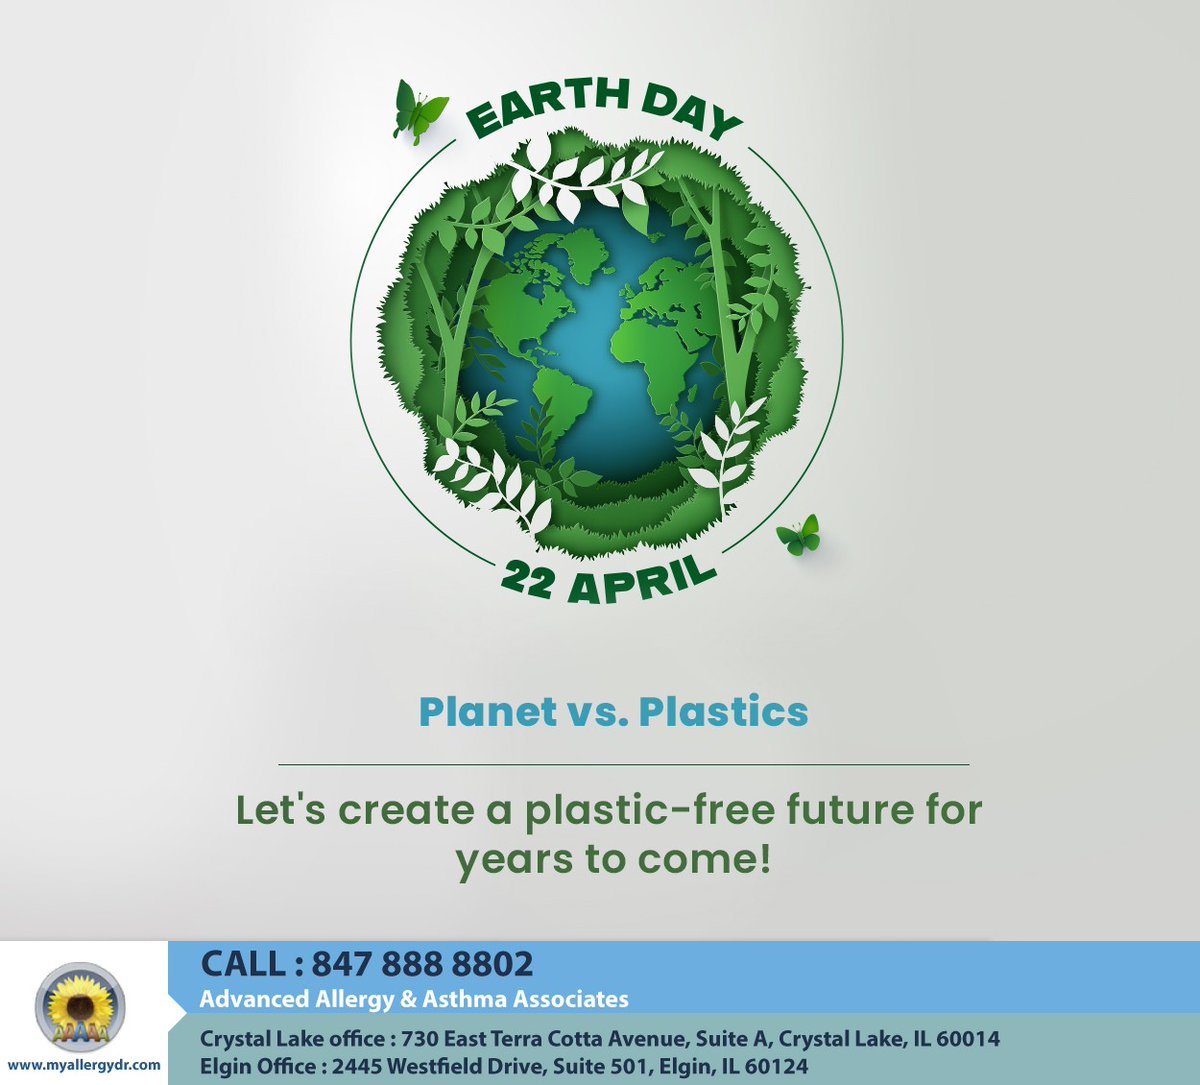 A plastic-free future is necessary for the sake of our health and our planet`s health. Do your part to reduce plastic waste and work towards our goal of a 60% reduction in plastic production by 2040. #earthday #crystallake #IL #myallergydr